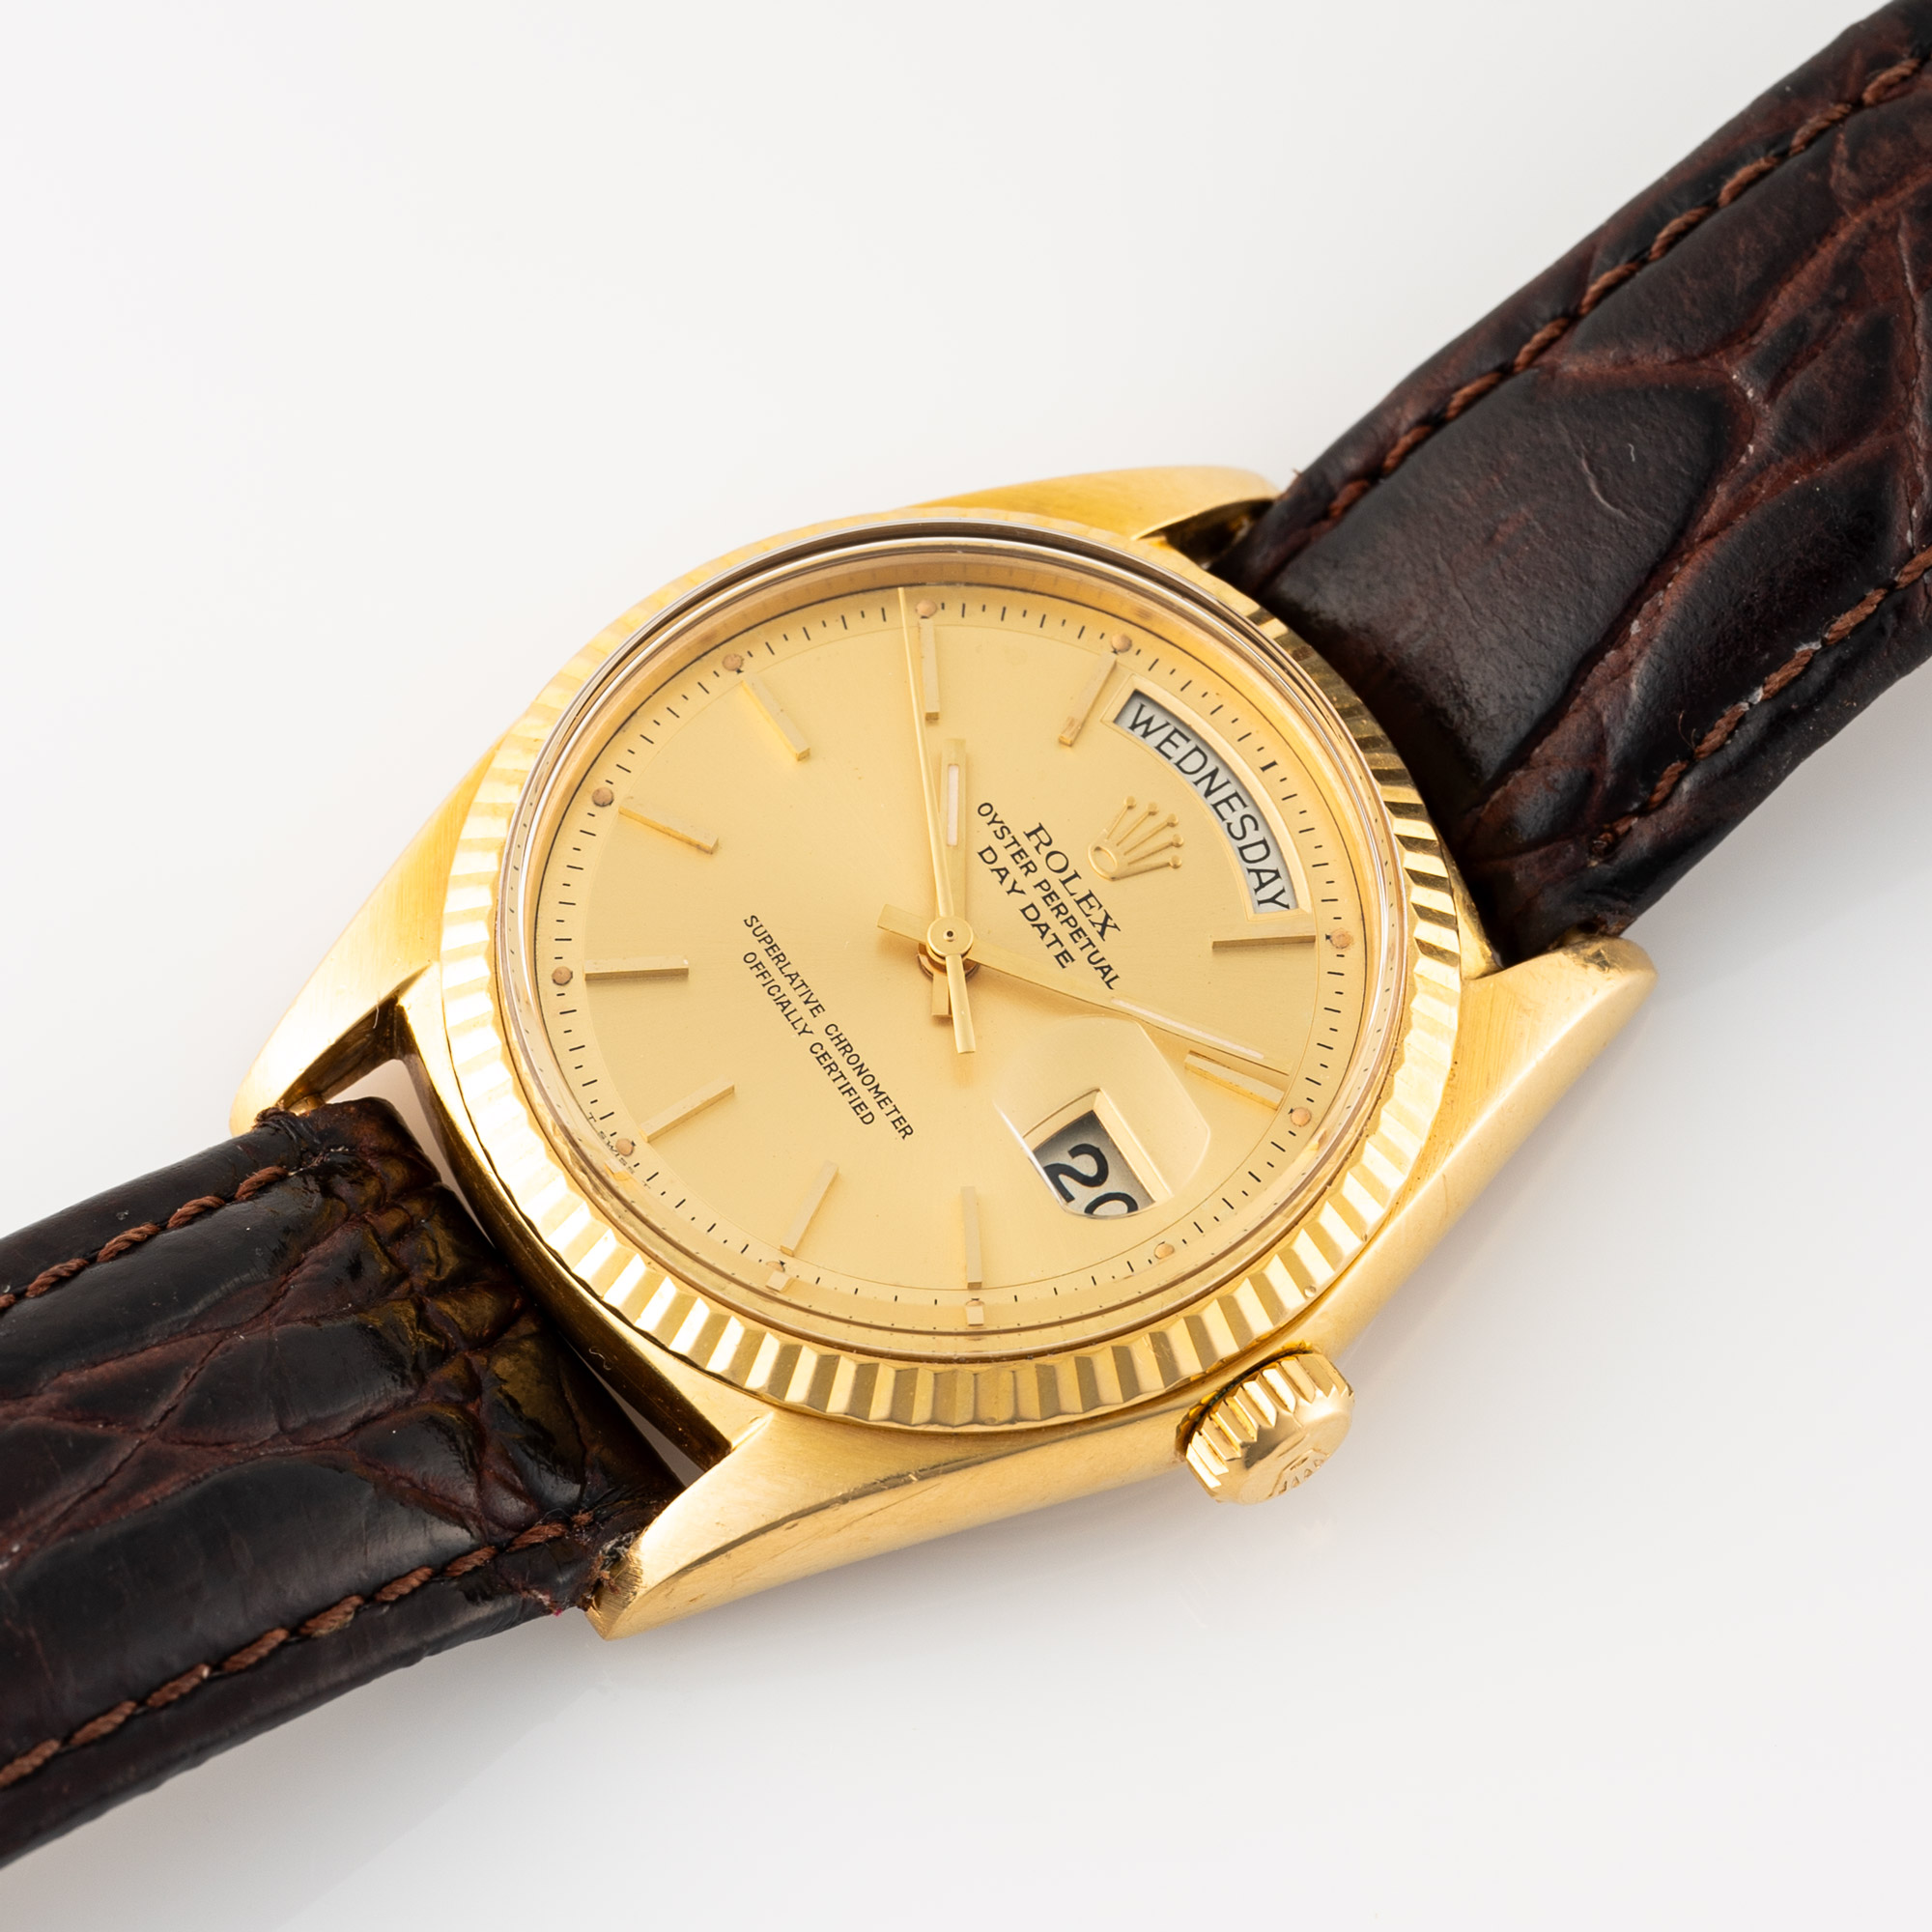 A GENTLEMAN'S SIZE 18K SOLID YELLOW GOLD ROLEX OYSTER PERPETUAL DAY DATE WRIST WATCH CIRCA 1971, - Image 3 of 8